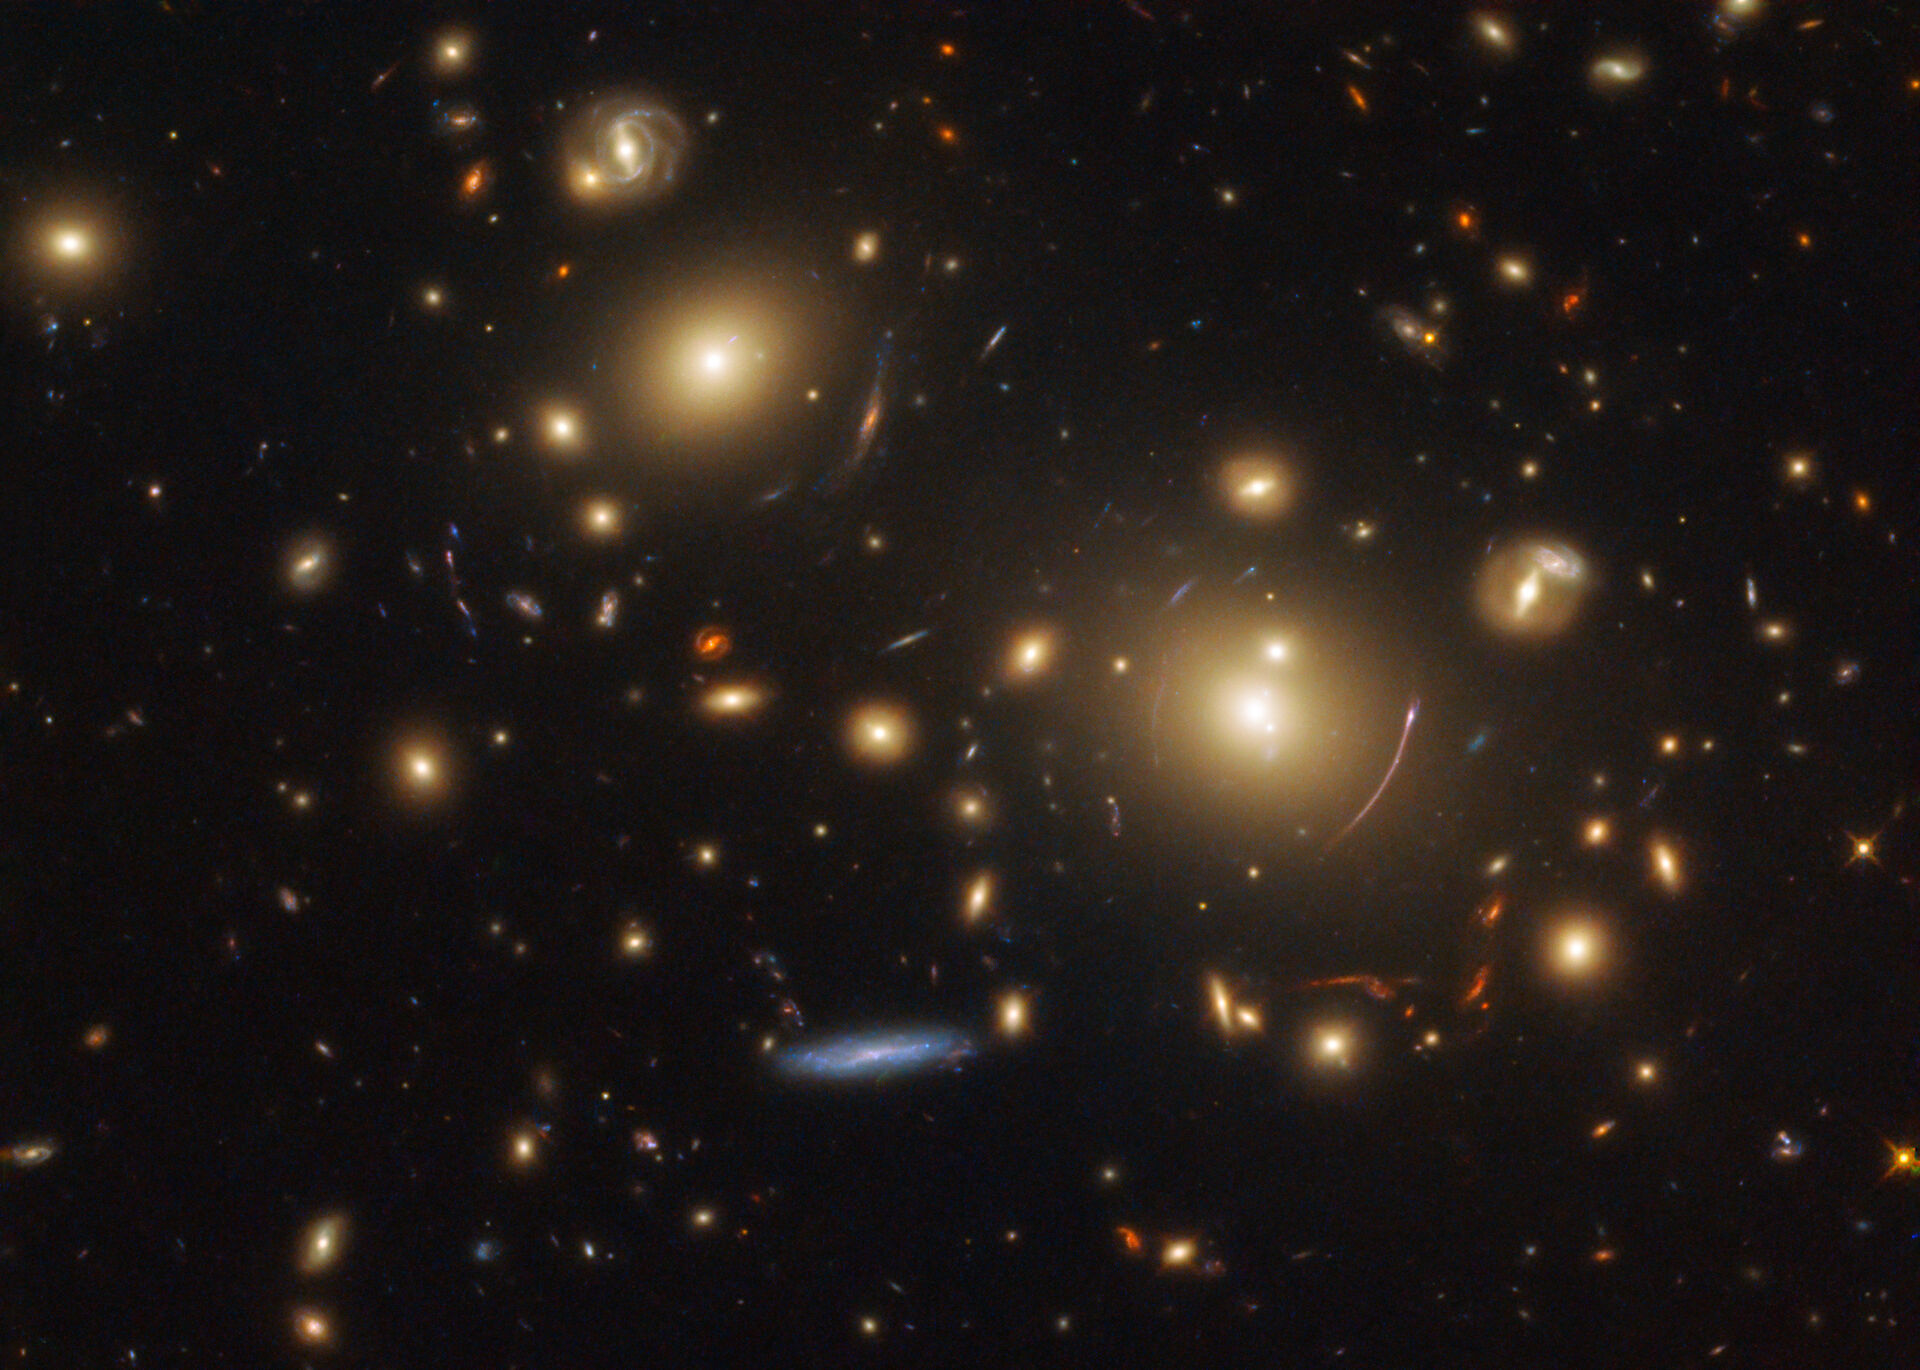 image of arches of lights due to the galaxies clusters effect called "gravitational lensing"